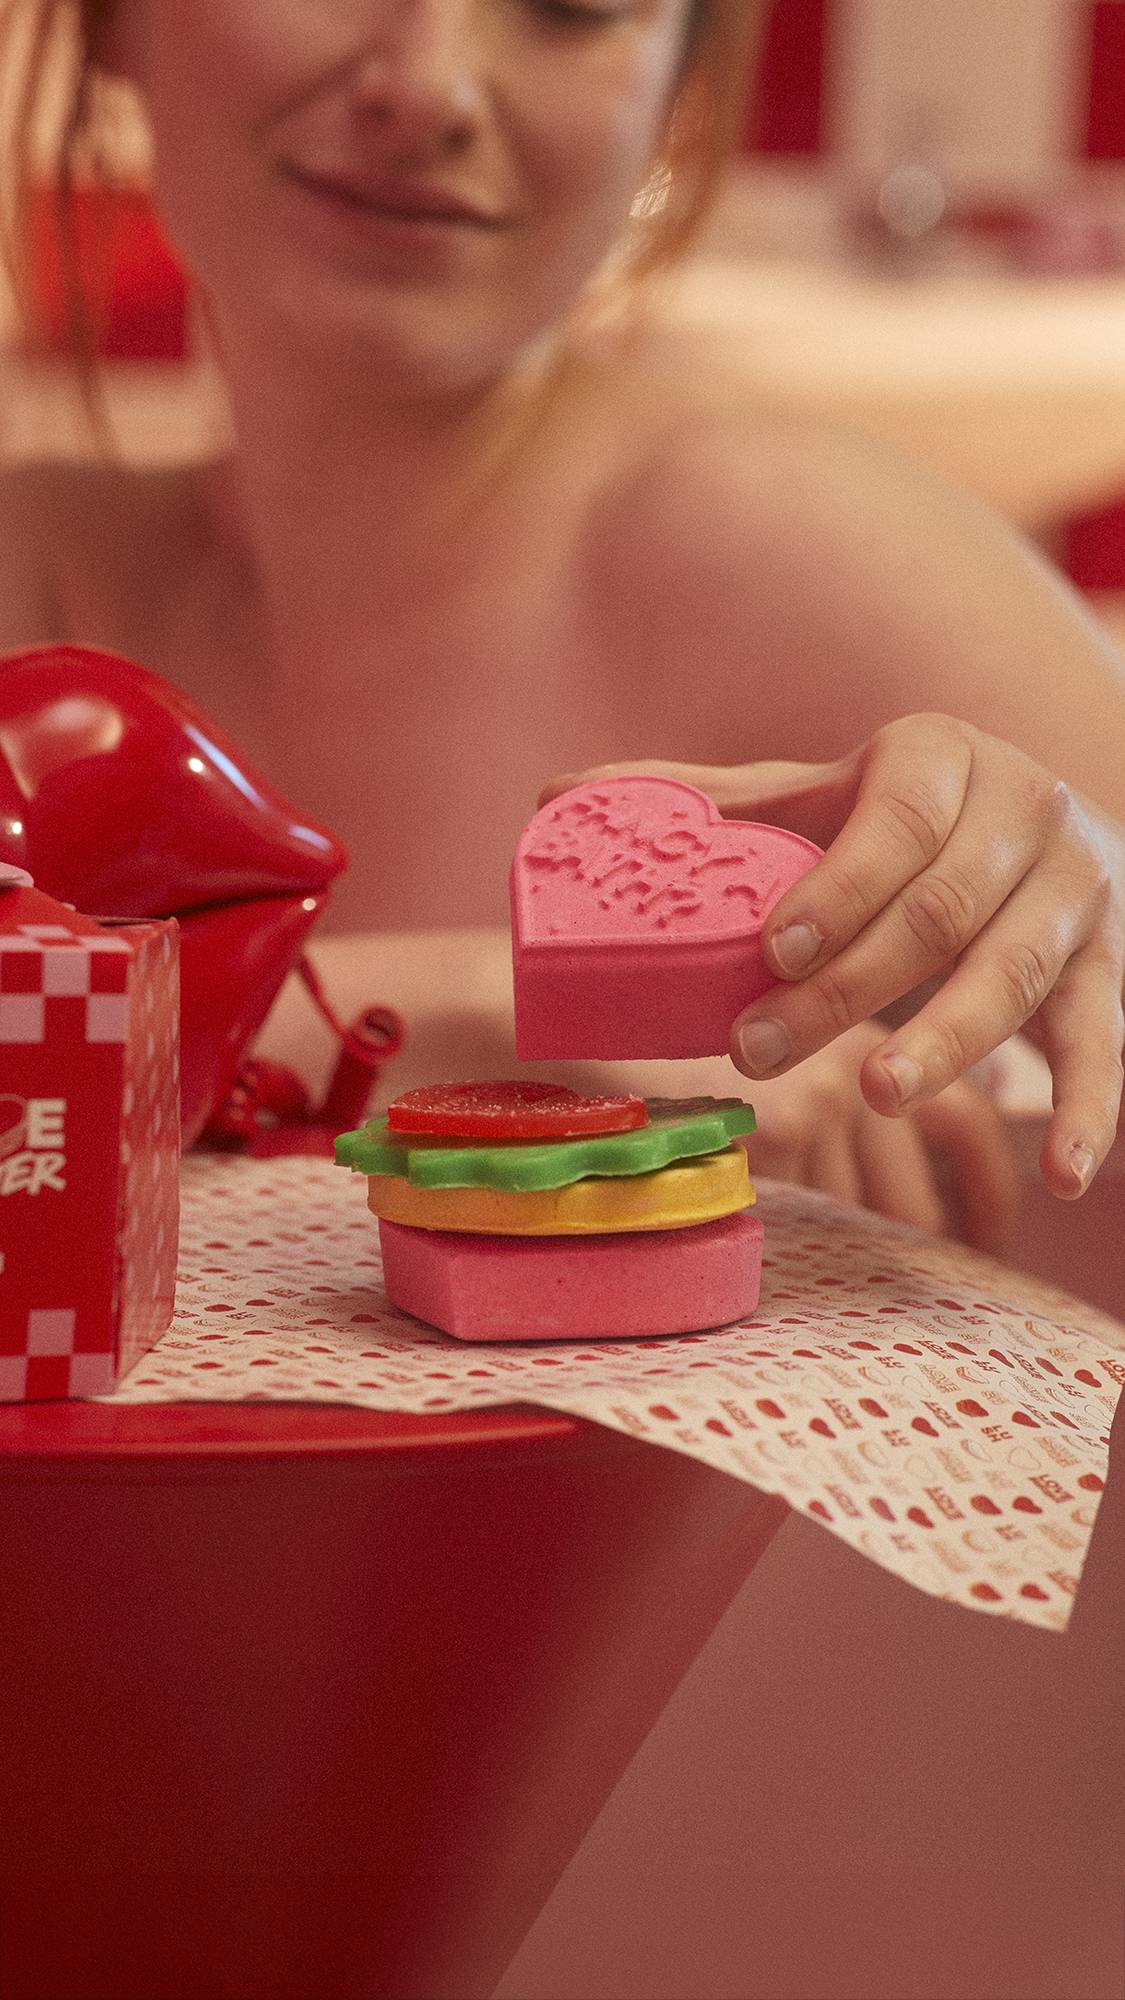 Image shows the Love Burger sat on a table in a red-themed bathroom as the model lifts off the top bun/bath bomb product.